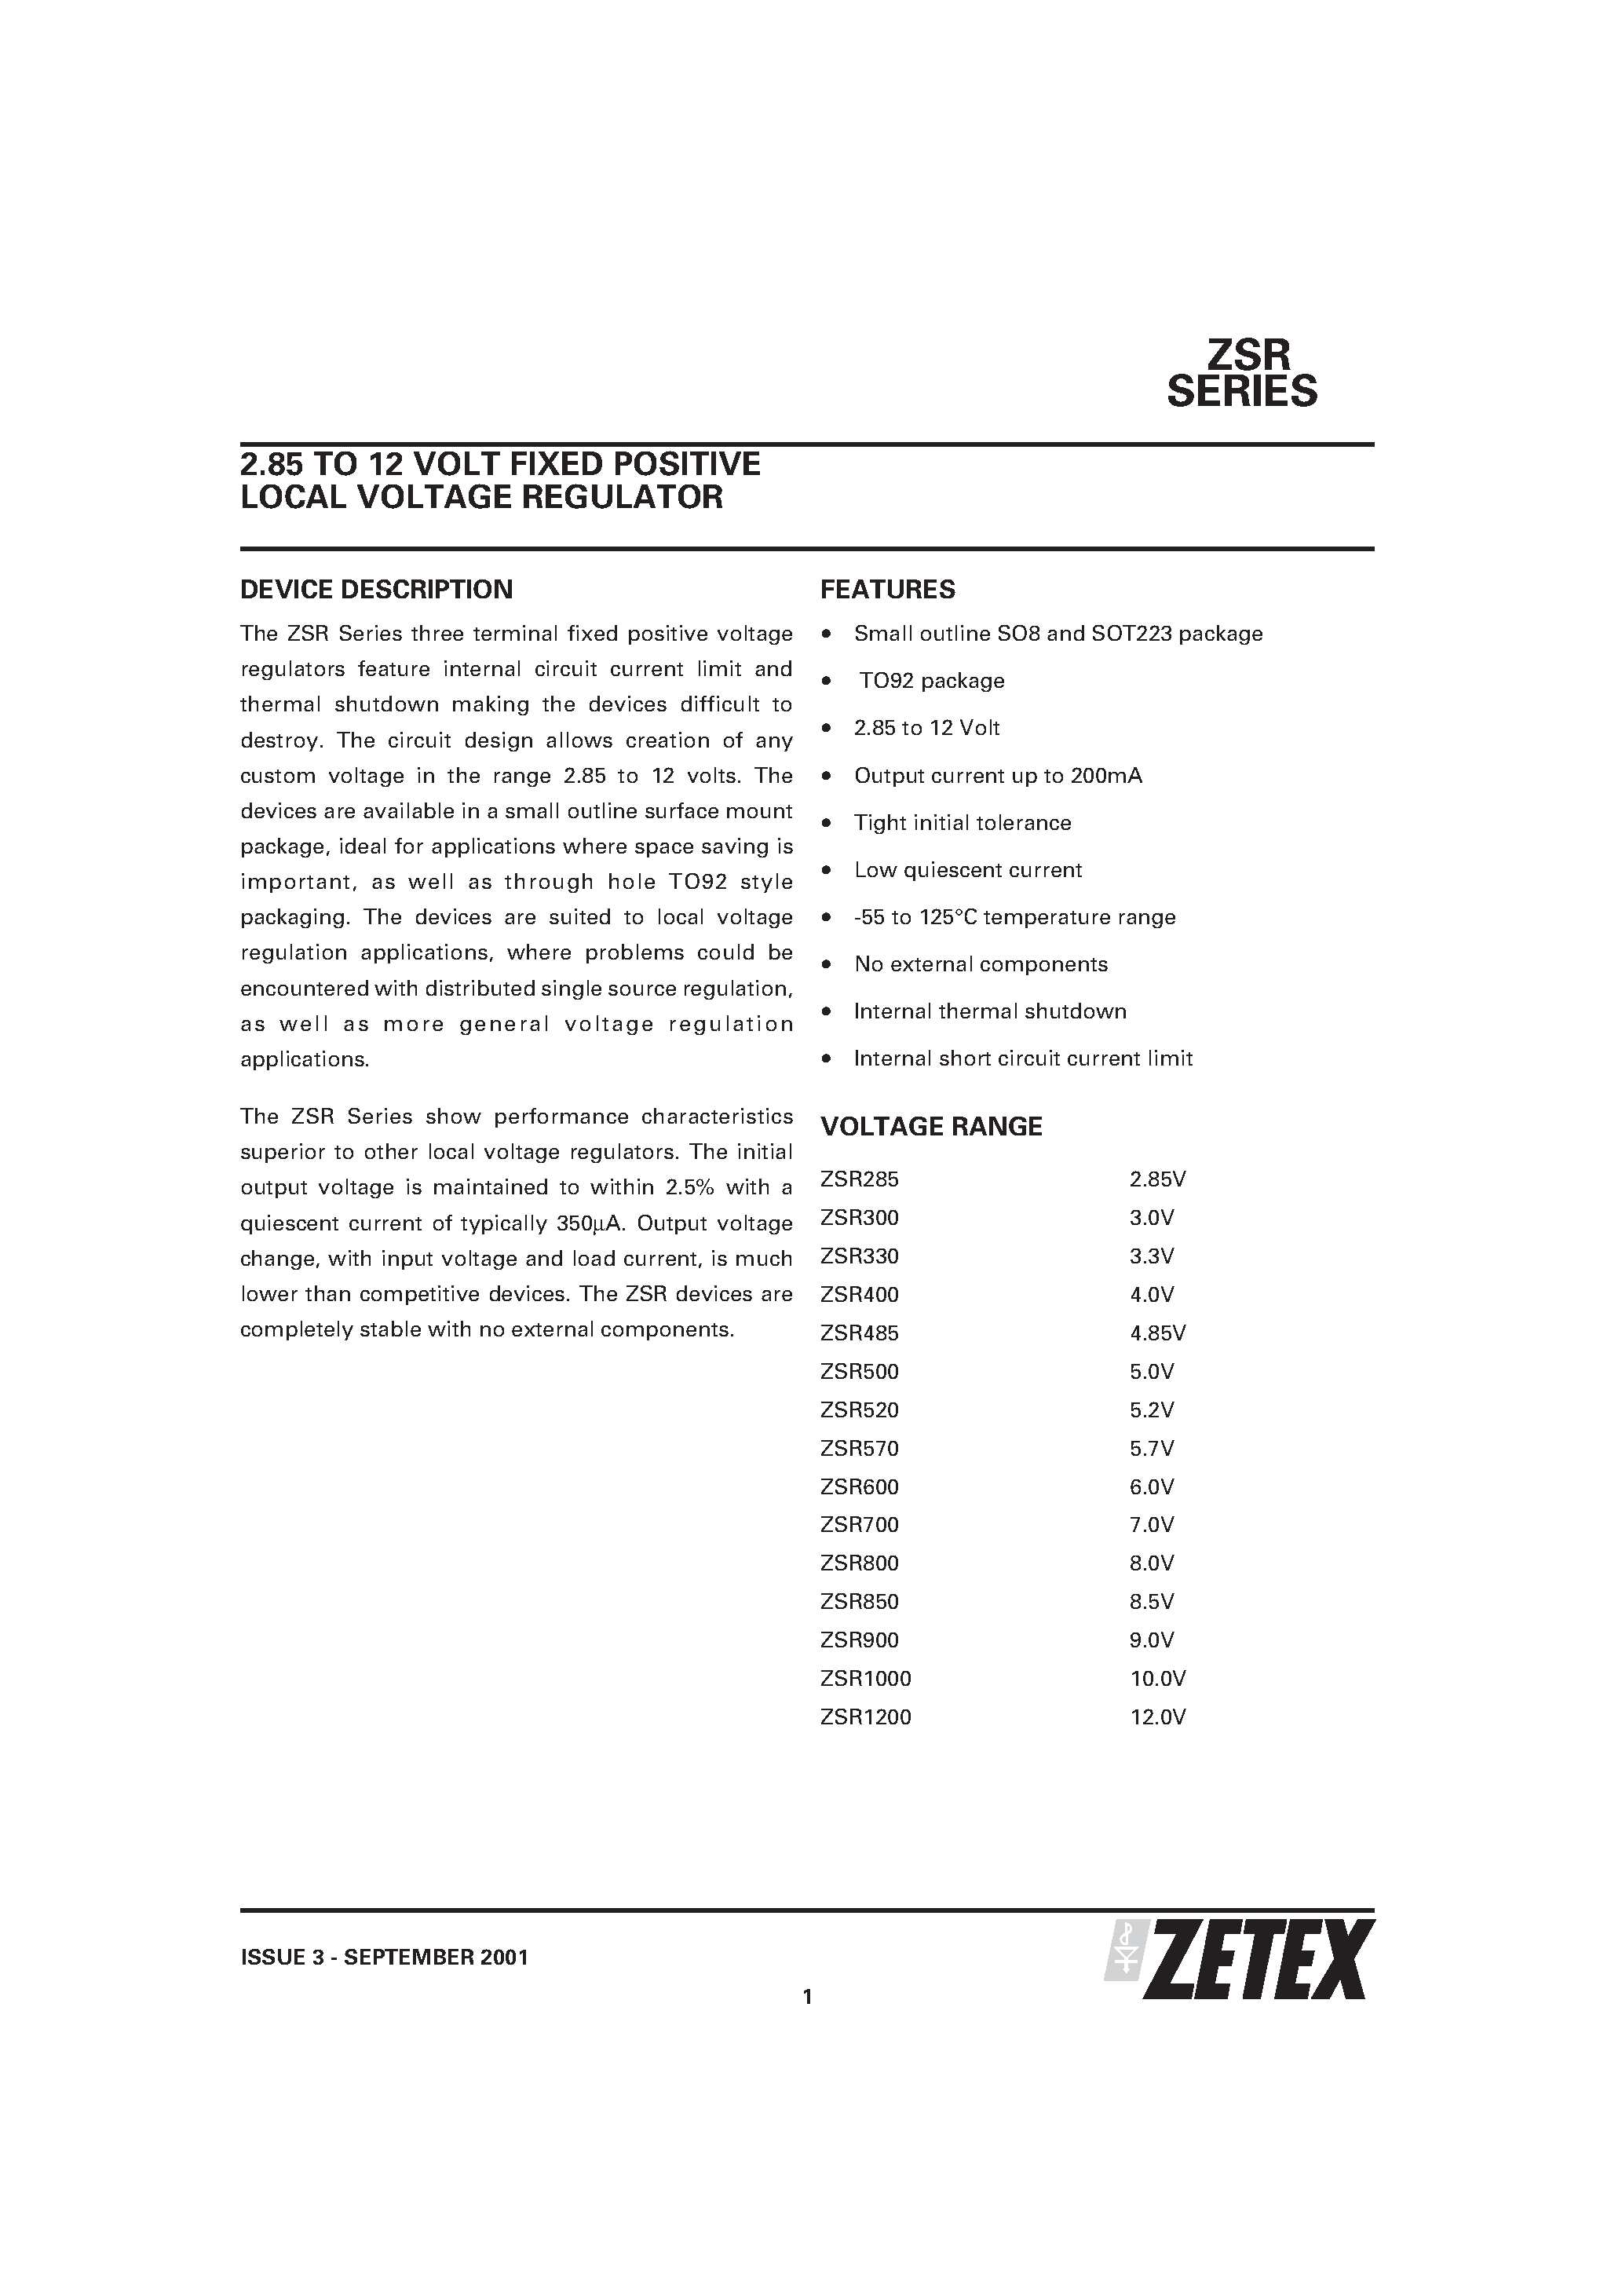 Datasheet ZSR850 - 2.85 TO 12 VOLT FIXED POSITIVE LOCAL VOLTAGE REGULATOR page 1